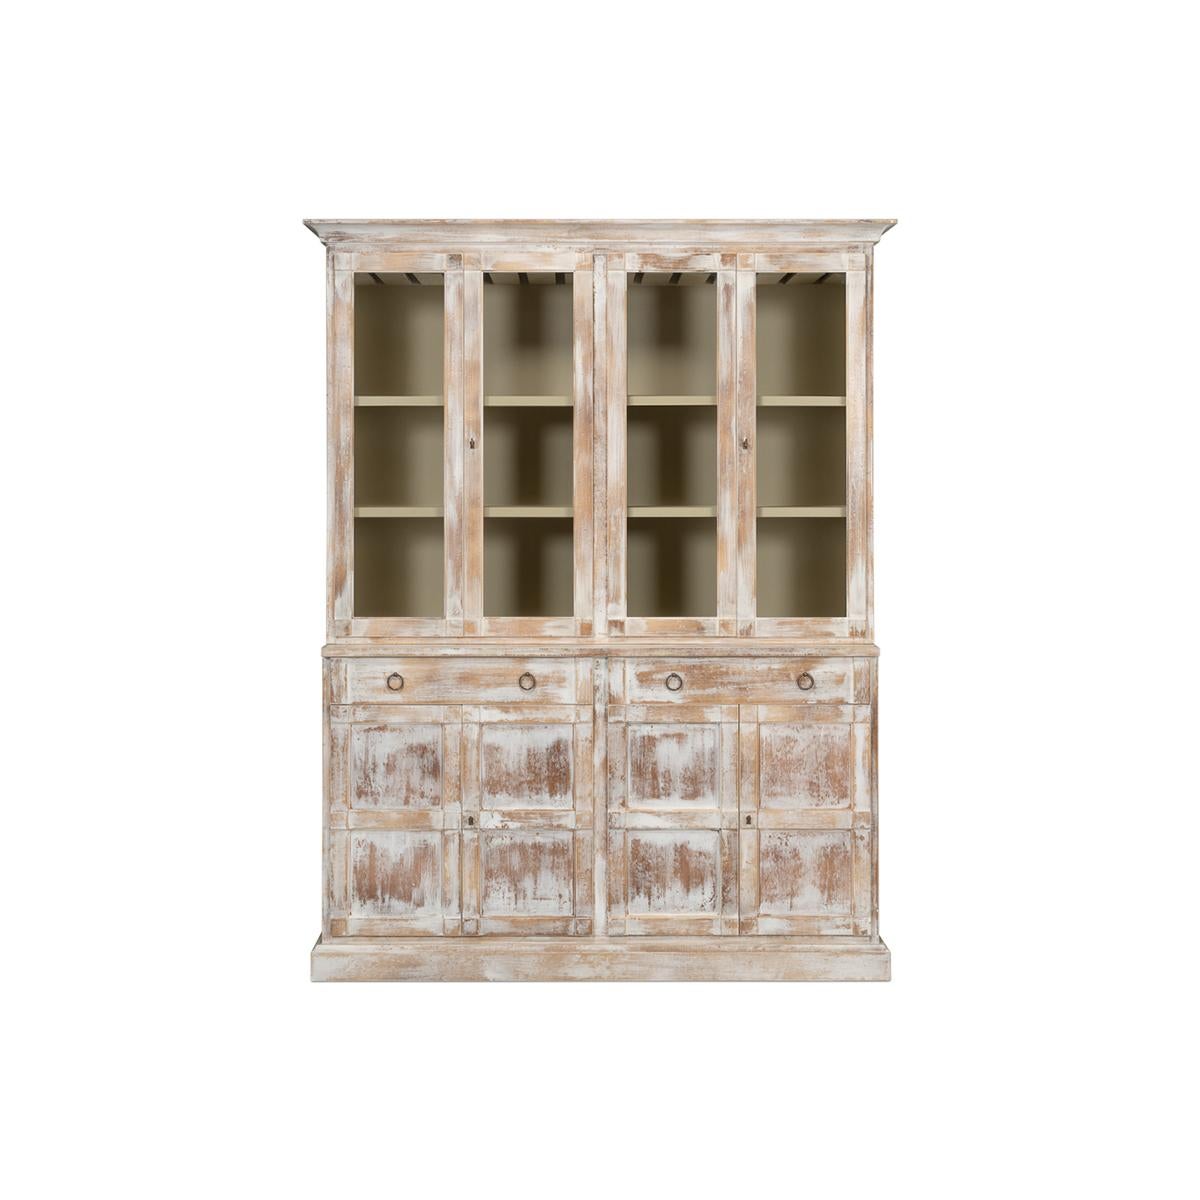 Modern distressed finish hutch, made of solid pine and painted and then hand rubbed to show an antiqued look. The interior was fitted with wine racks, and drawers, with glass front doors, raised on a high wasted four-door lower cabinet with two